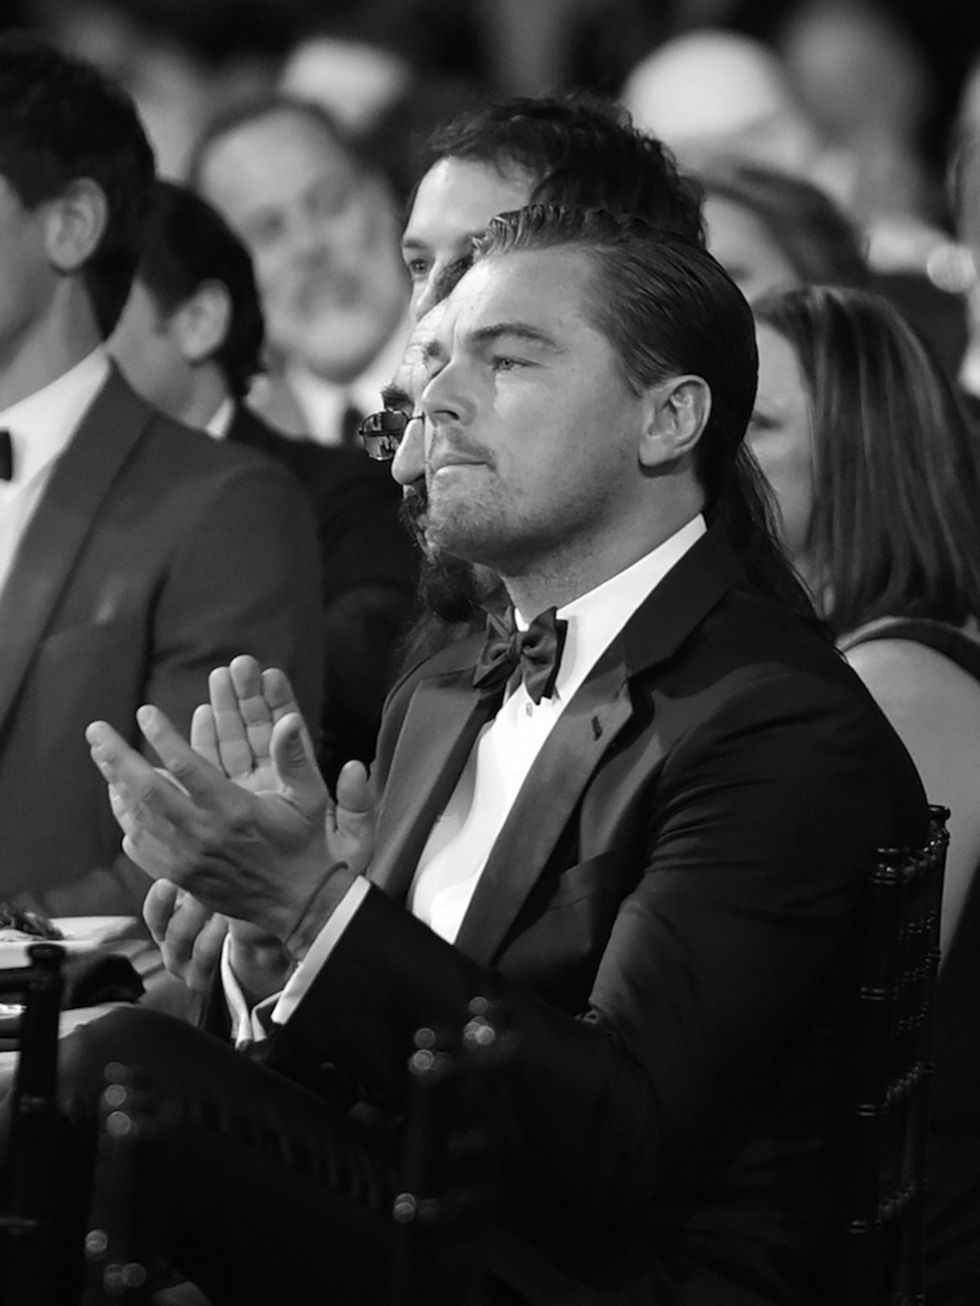 A respectful slow clap from Leonardo DiCaprio. Is that a Kabbalah bracelet?